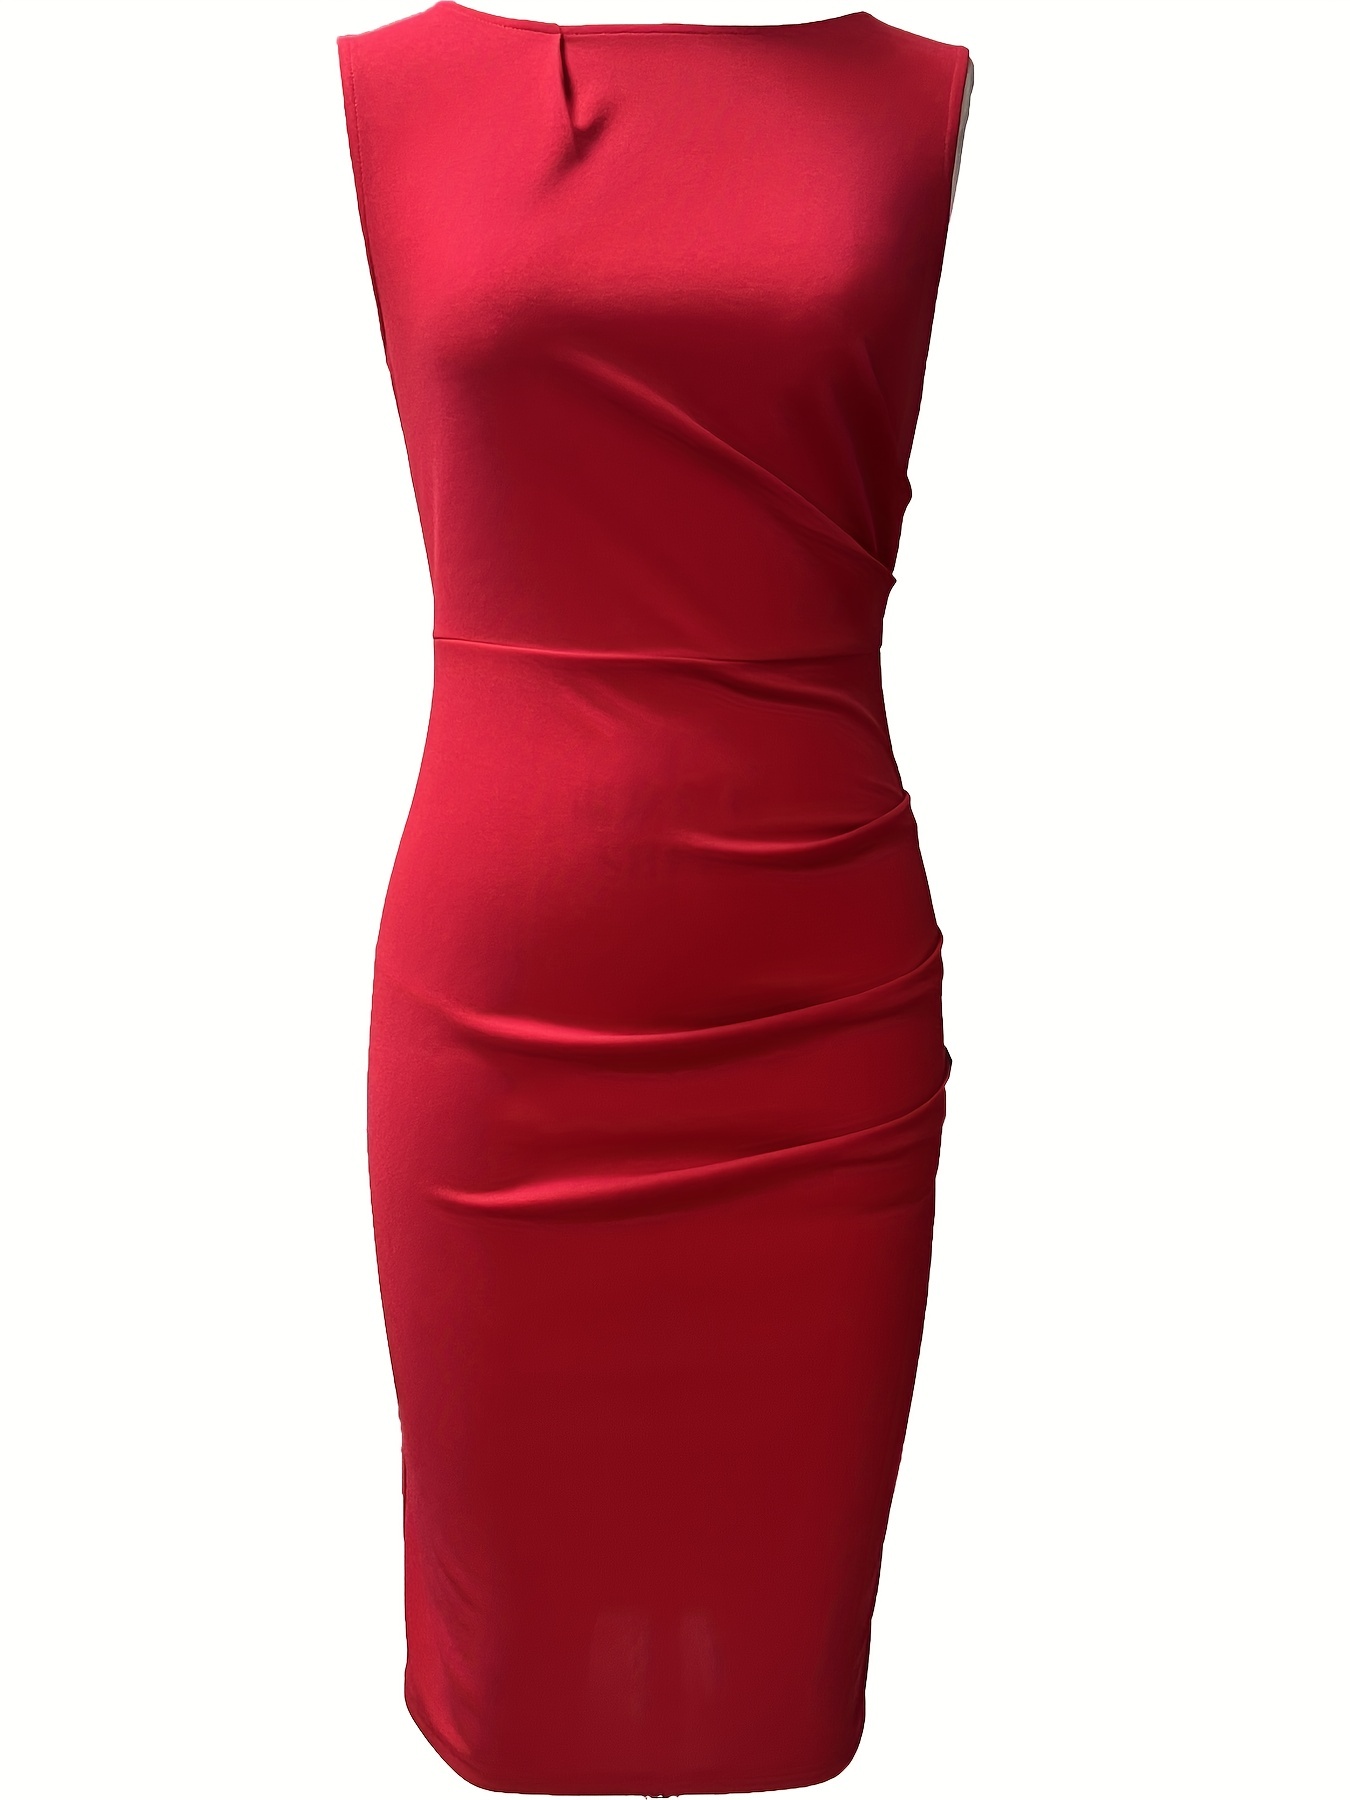 ruched pencil dress elegant crew neck sleeveless work office dress womens clothing details 18